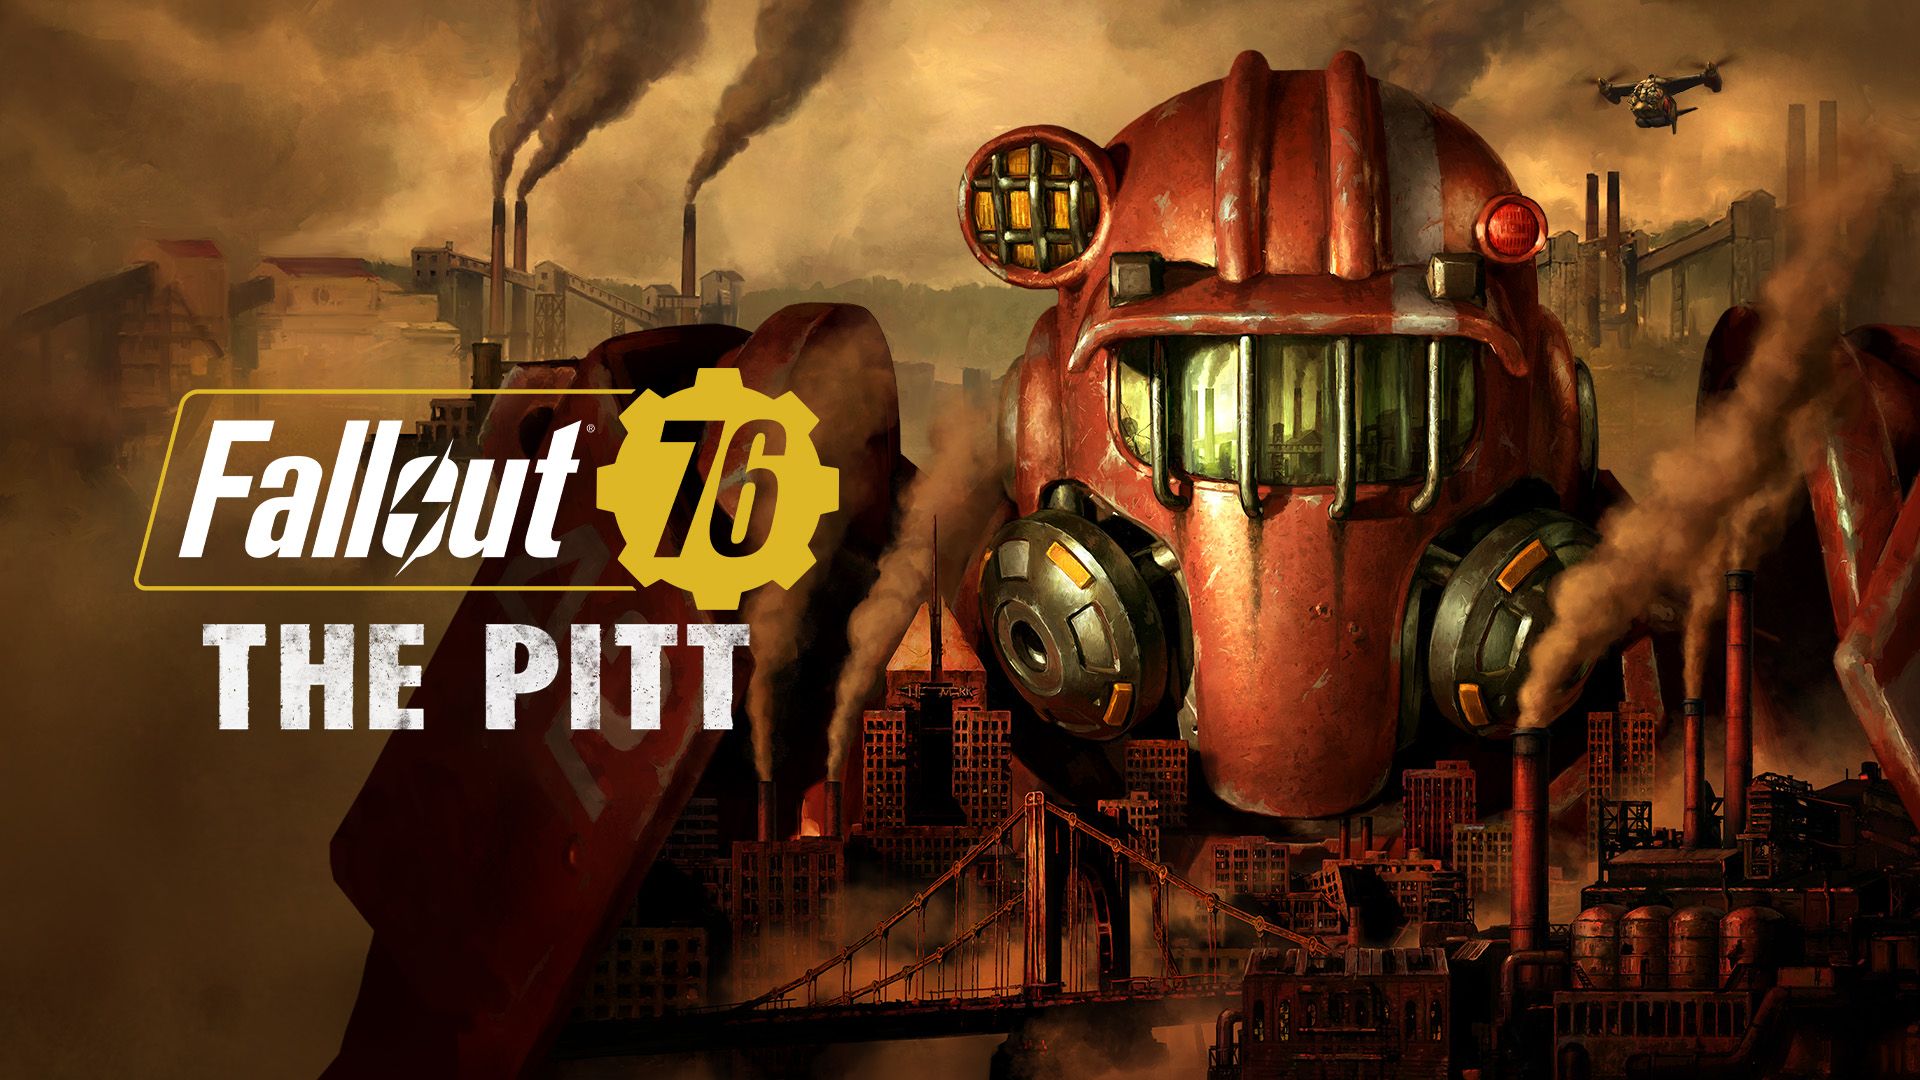 enter-the-pitt-now-with-fallout-76-s-expeditions-update-inverse-zone